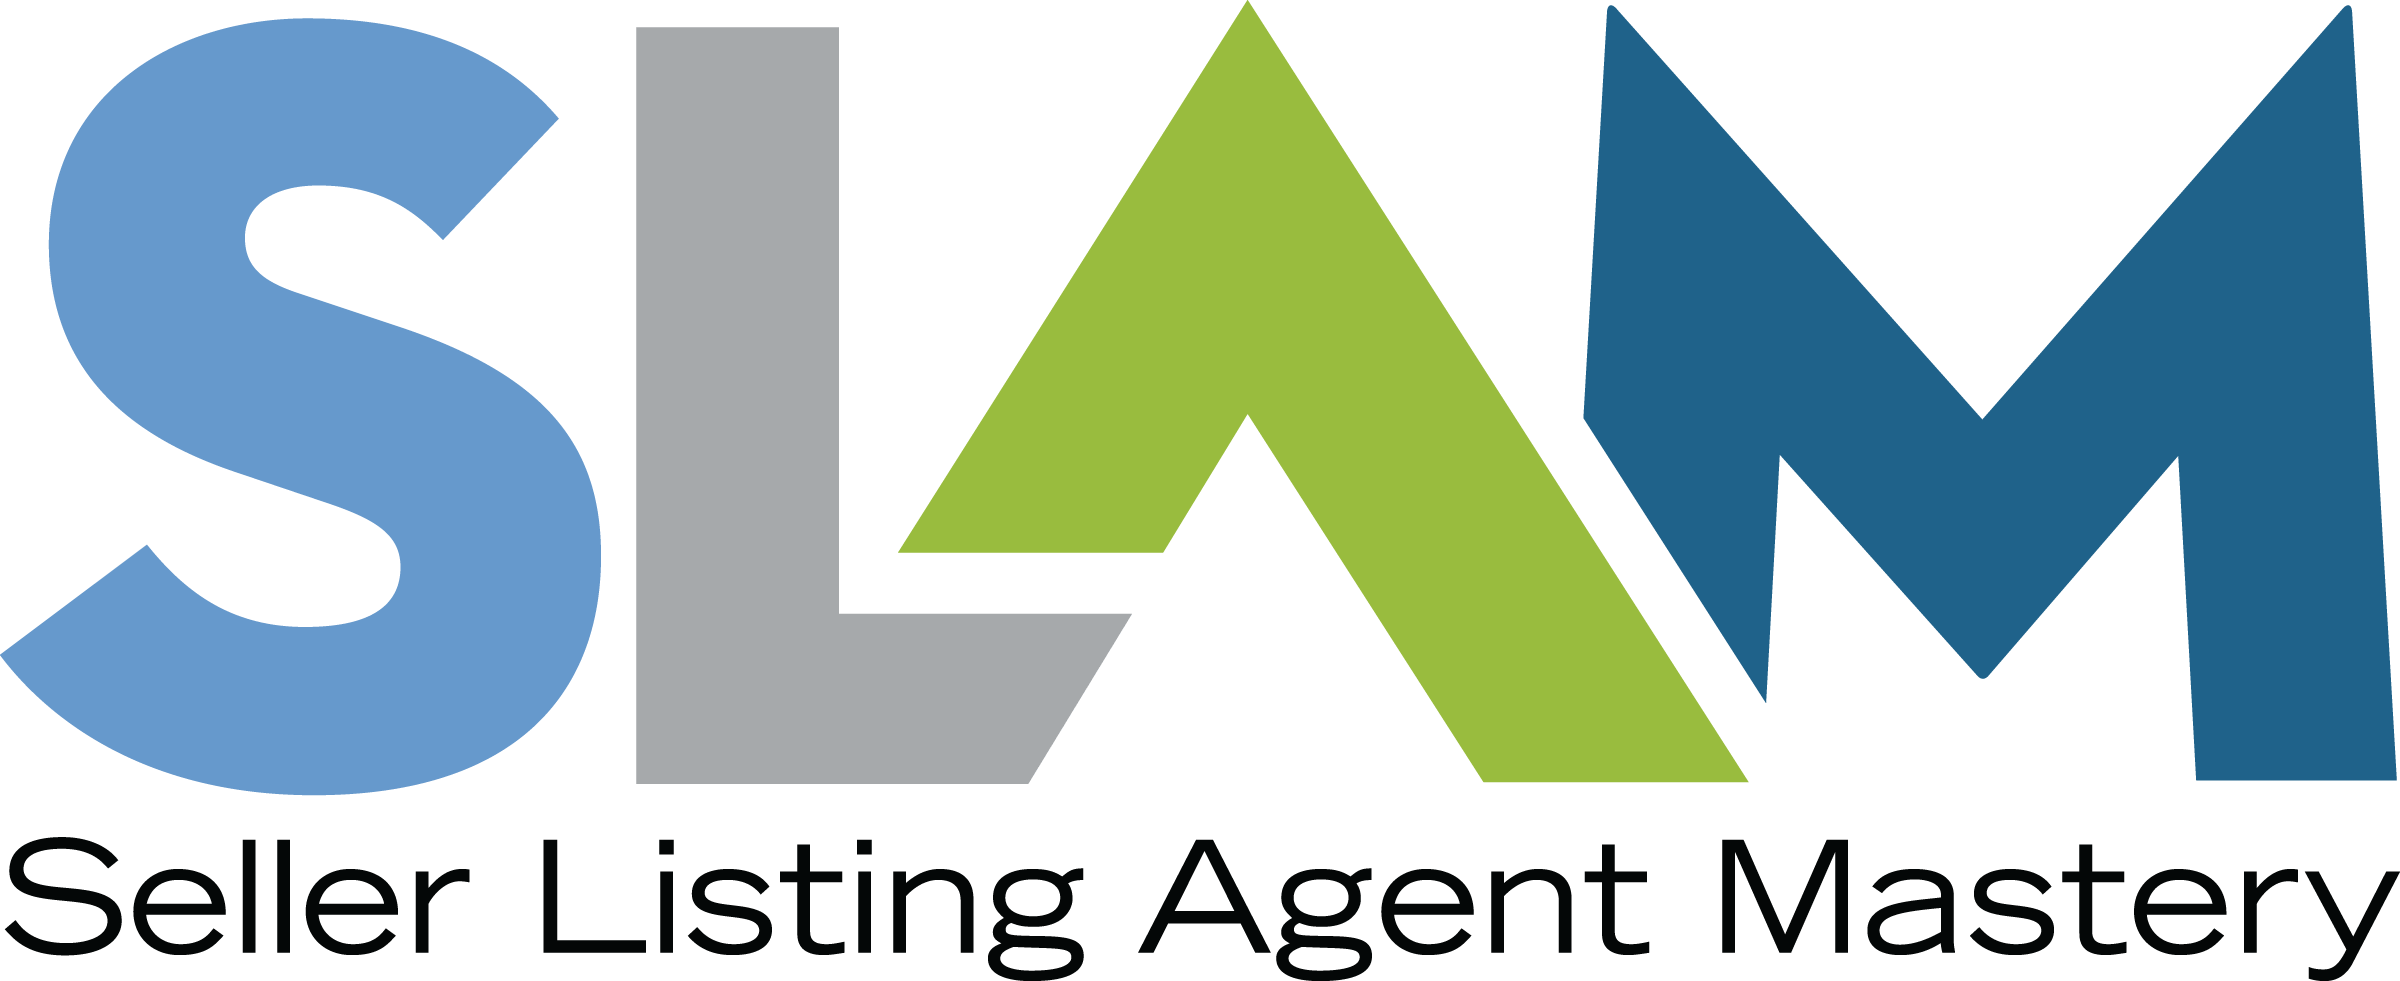 Seller Listing Agent Mastery